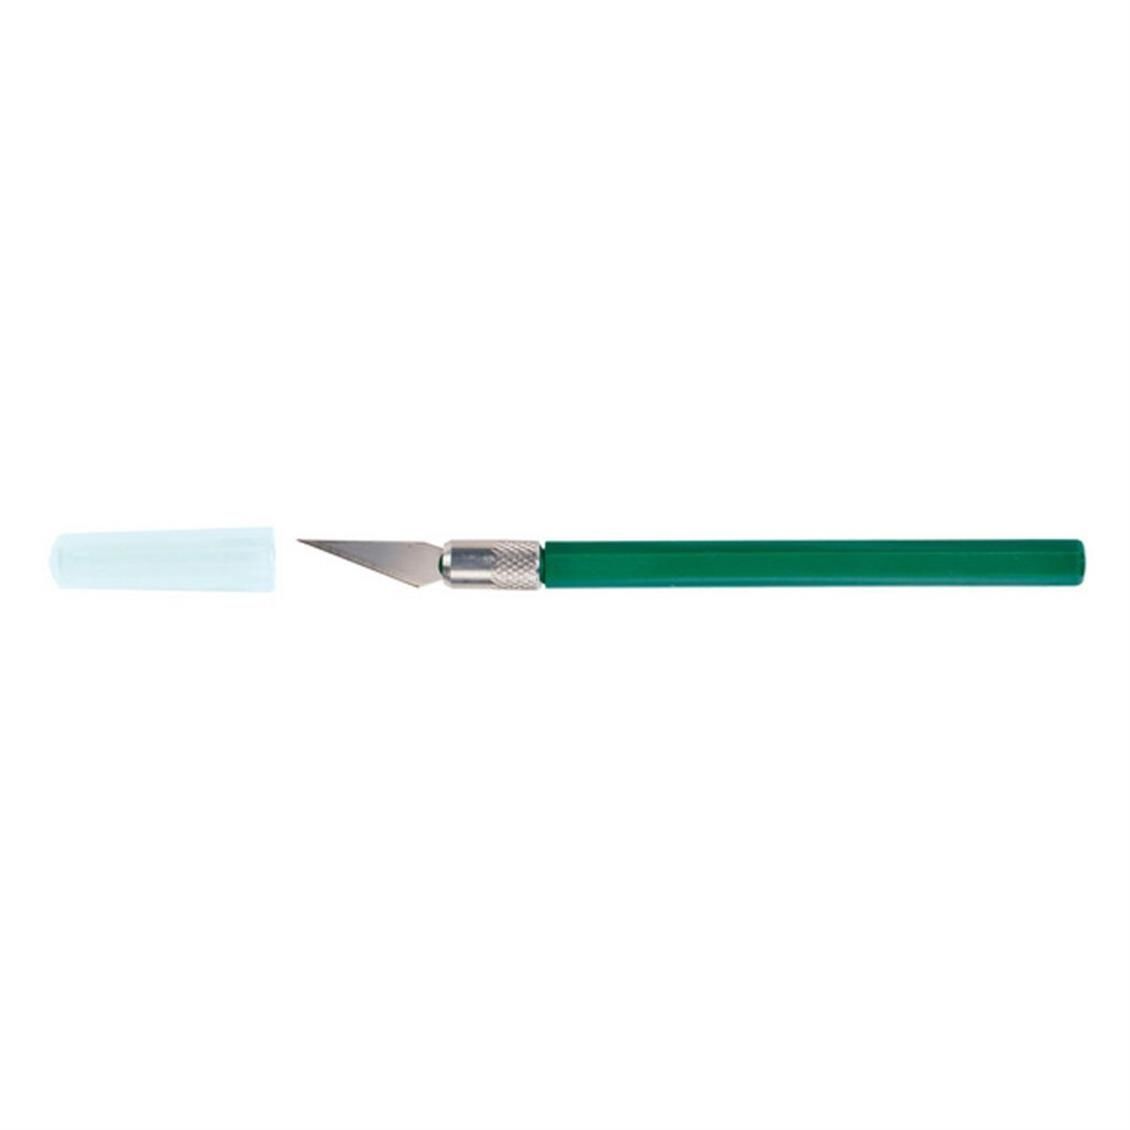 16032 K30 LIGHT DUTY RITE CUT GREEN WITH SAFETY CA